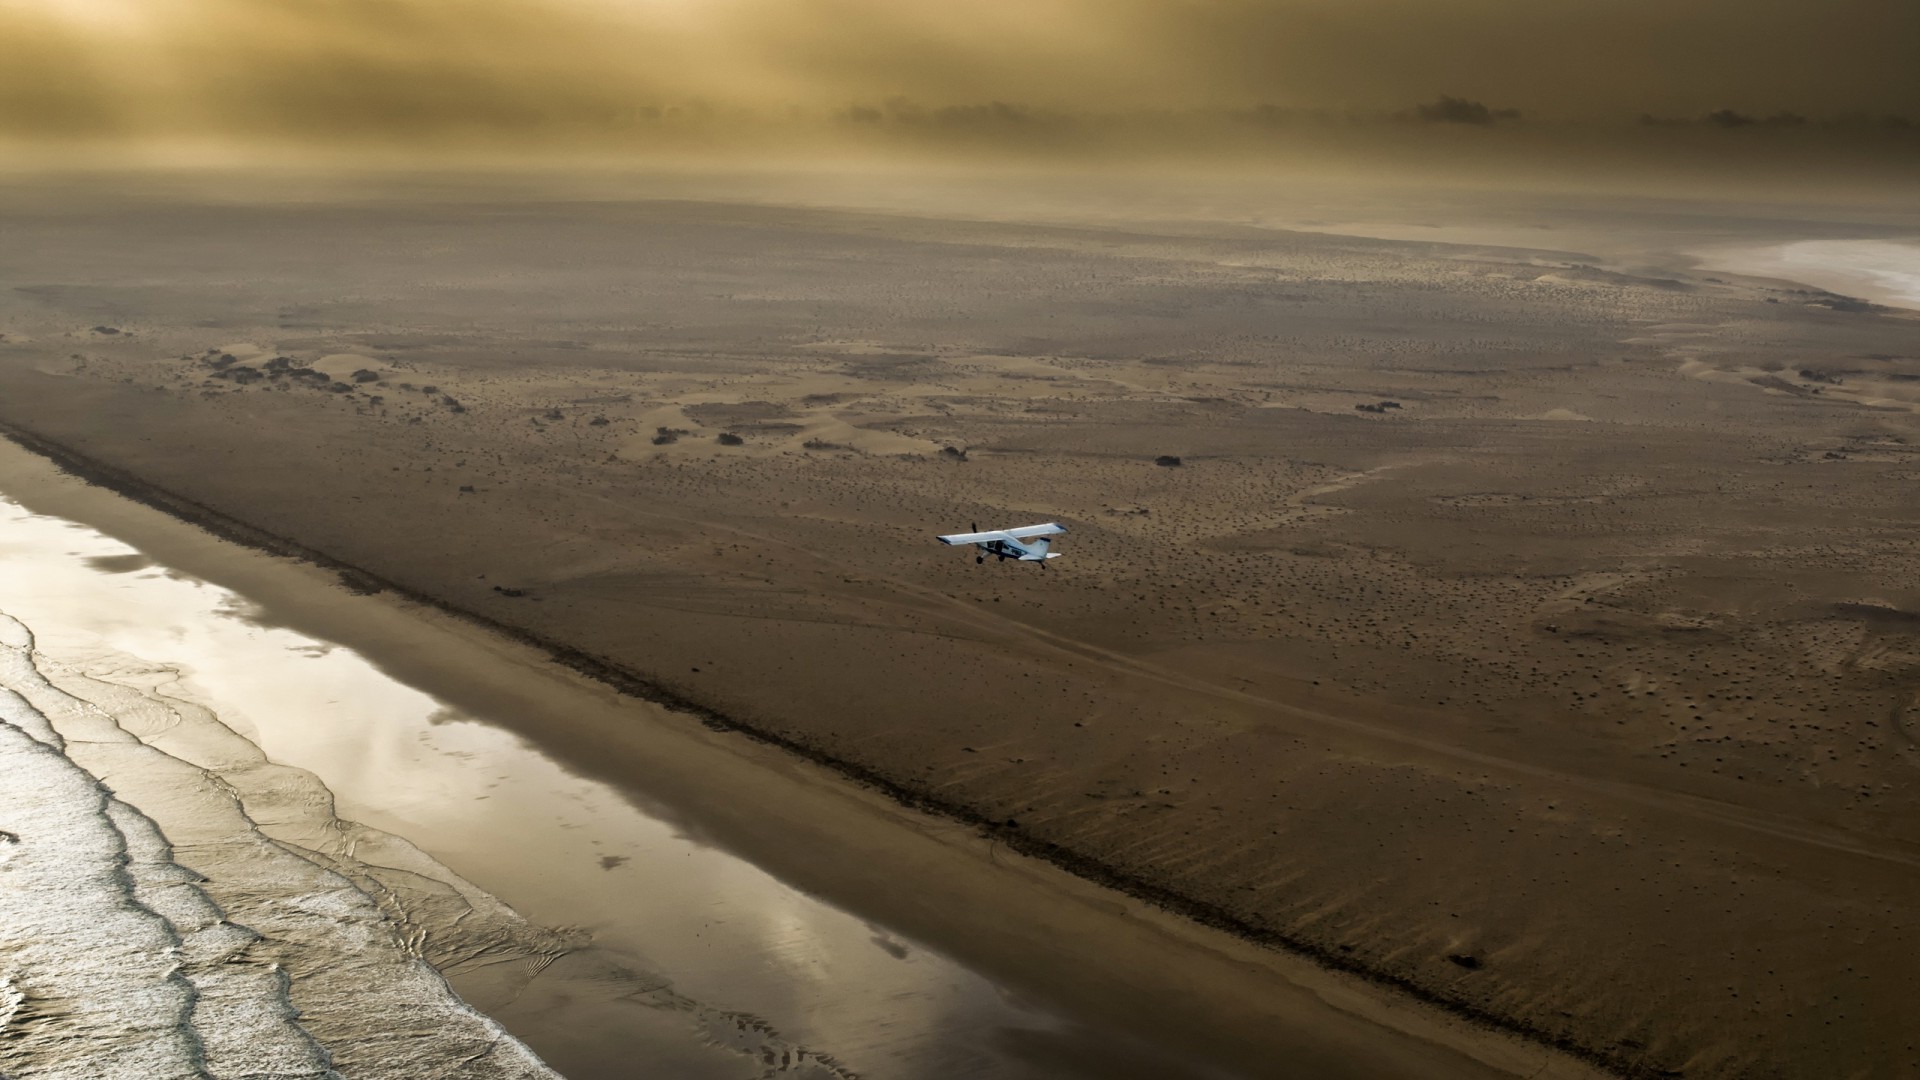 nature, Landscape, Sea, Water, Horizon, Waves, Coast, Airplane, Flying, Sun Rays, Mist, Morocco, Africa, Aerial View Wallpaper